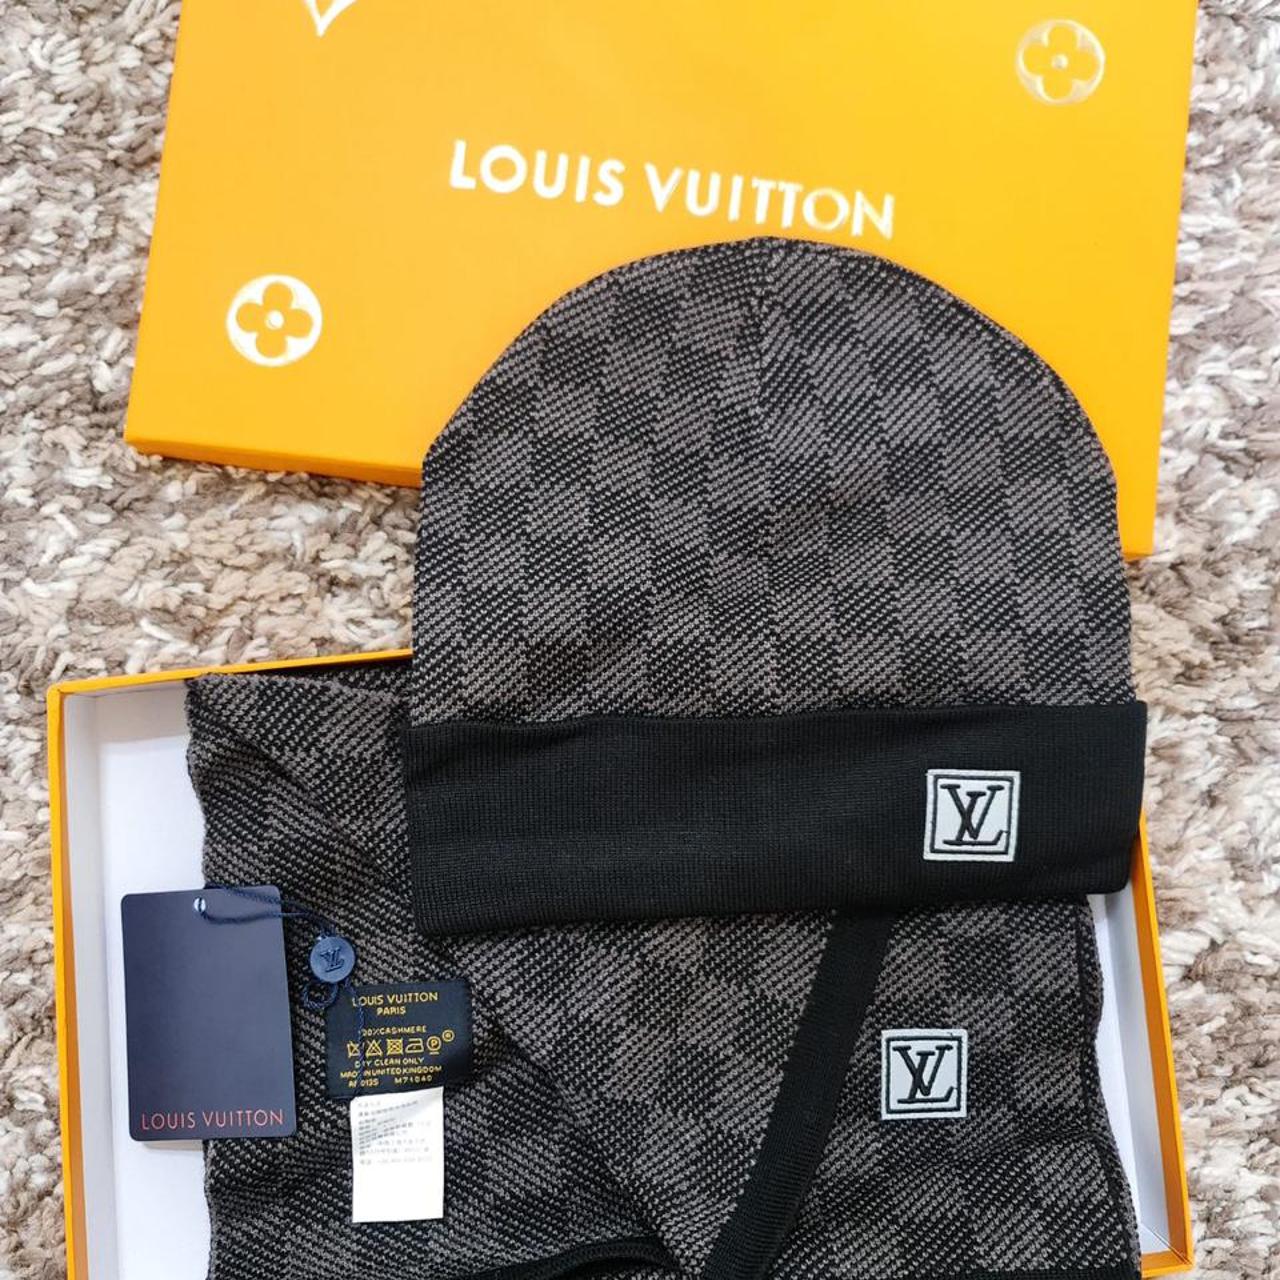 Lv beanie and scarf in very good condition brand new - Depop